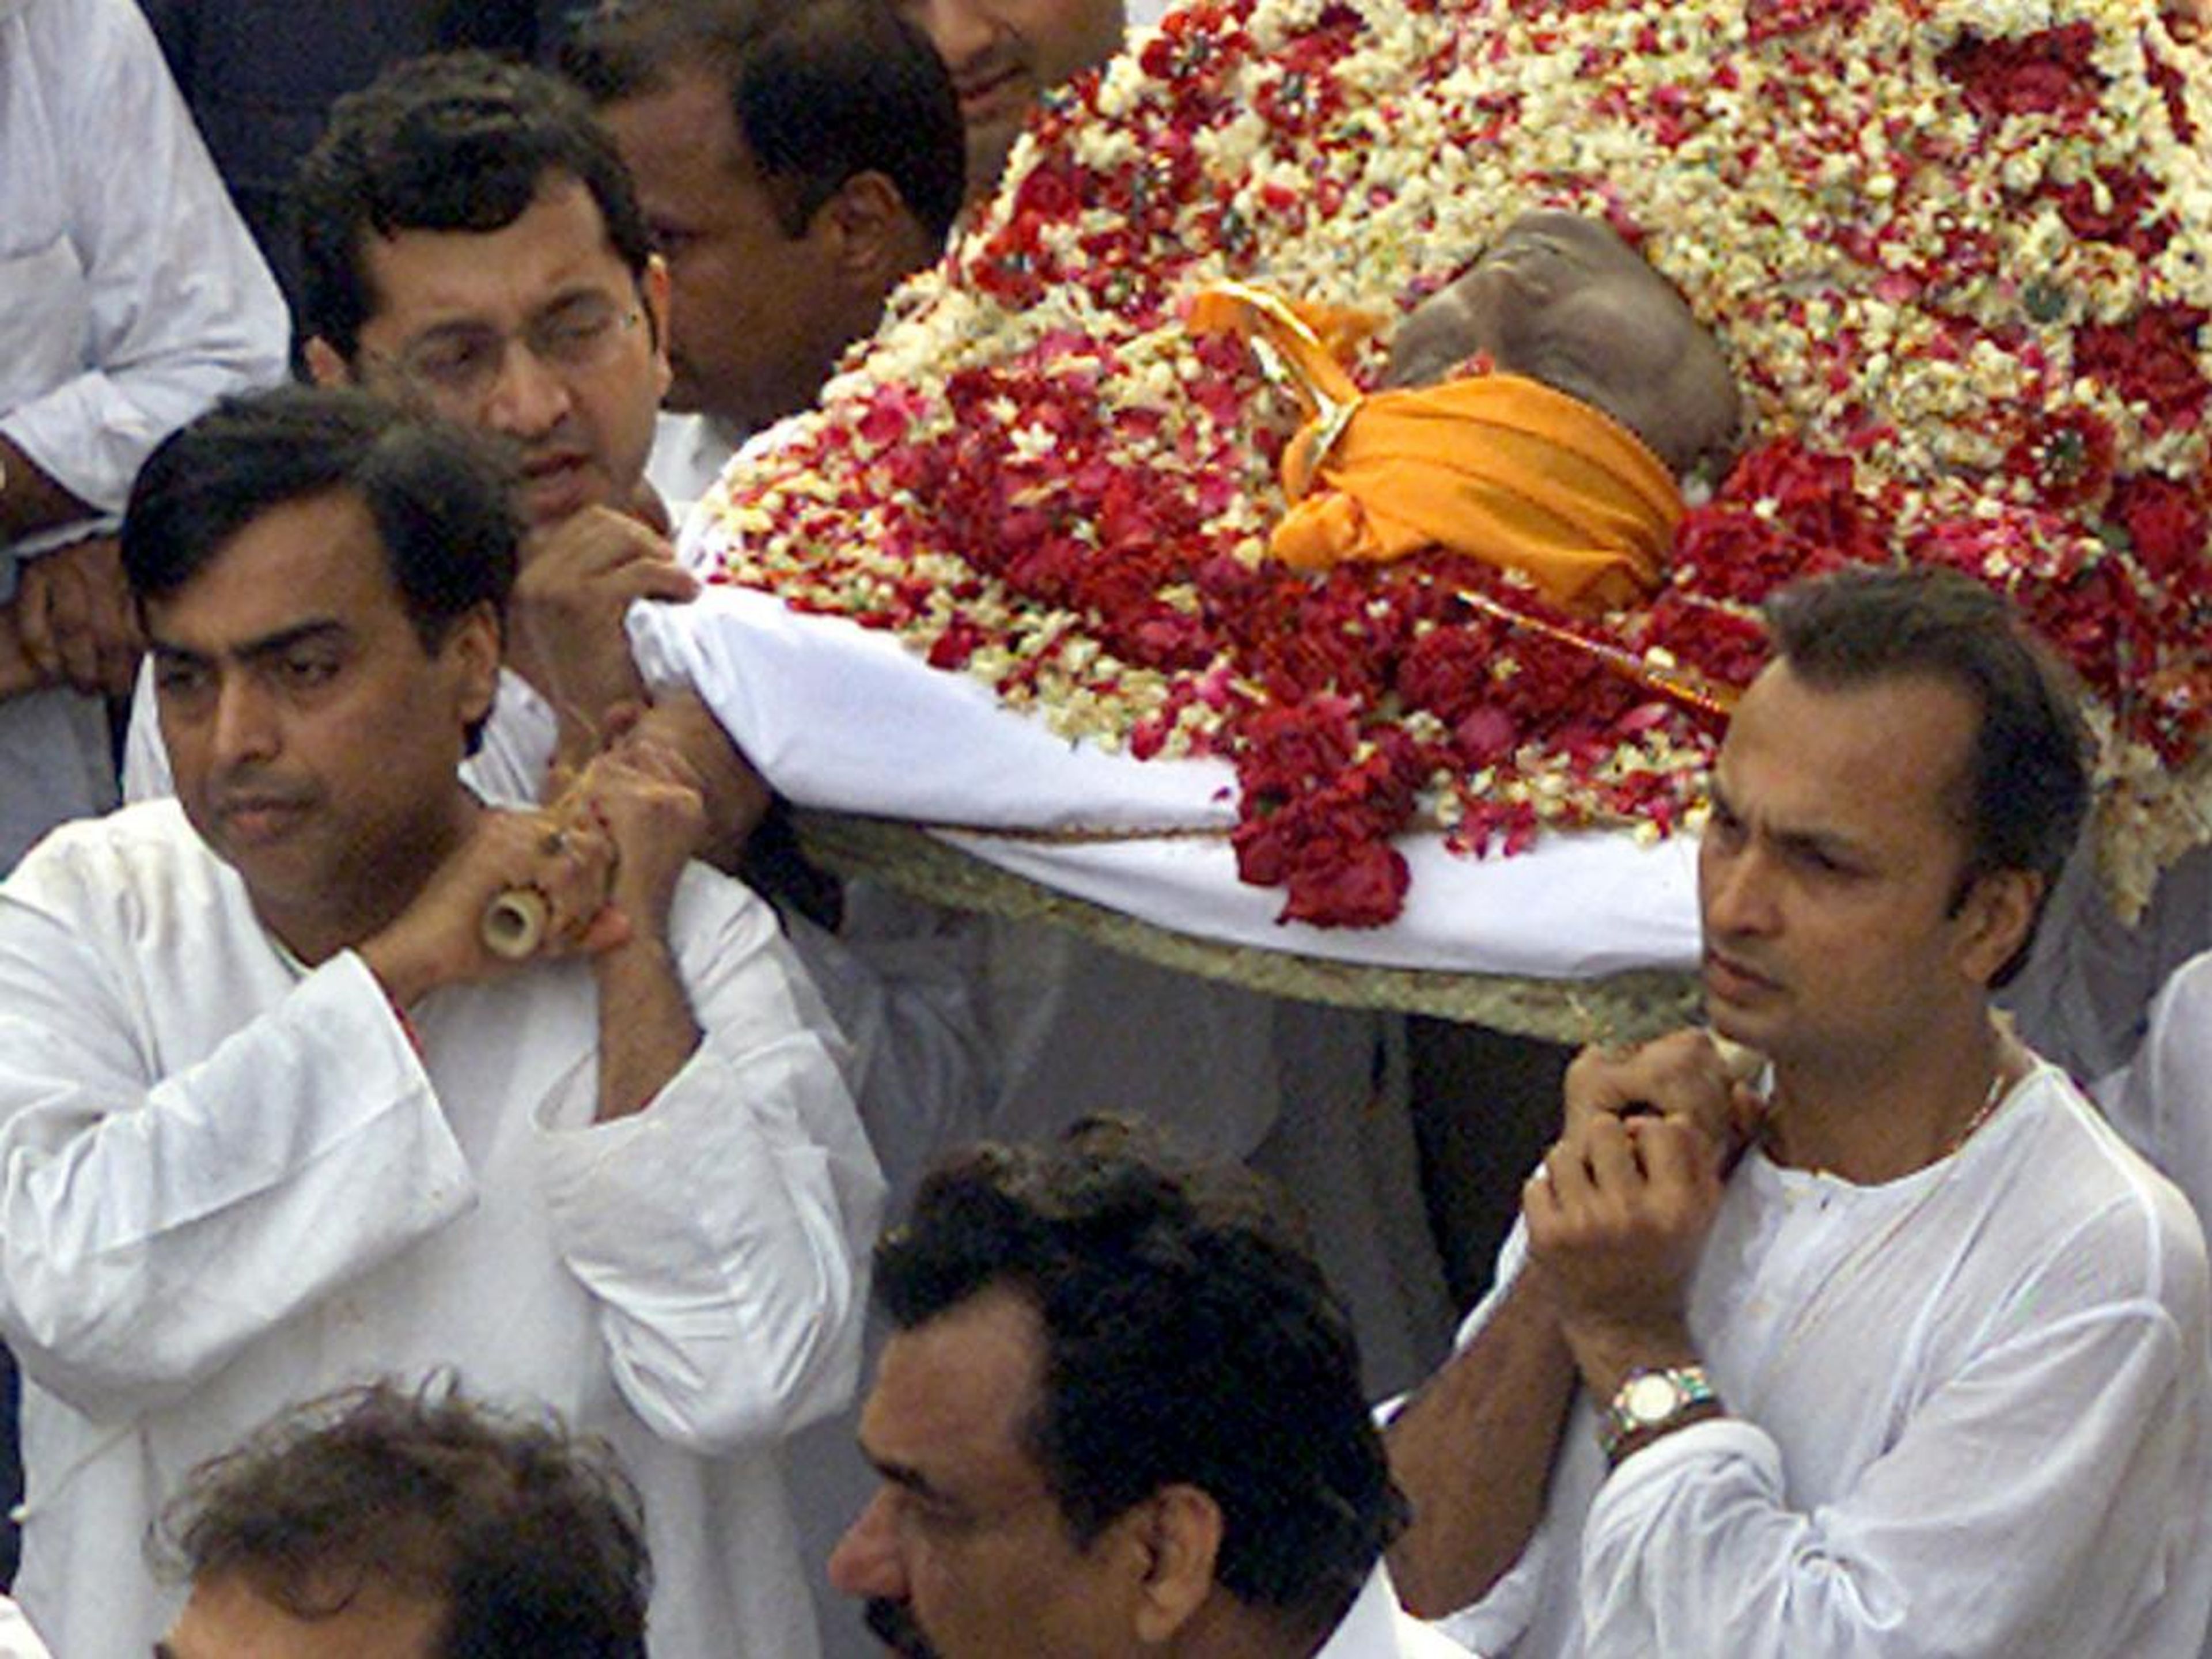 Mukesh Ambani, left, and Anil Ambani, right, carry their father's body to a crematorium in Bombay on July 7, 2002, a day after his death.